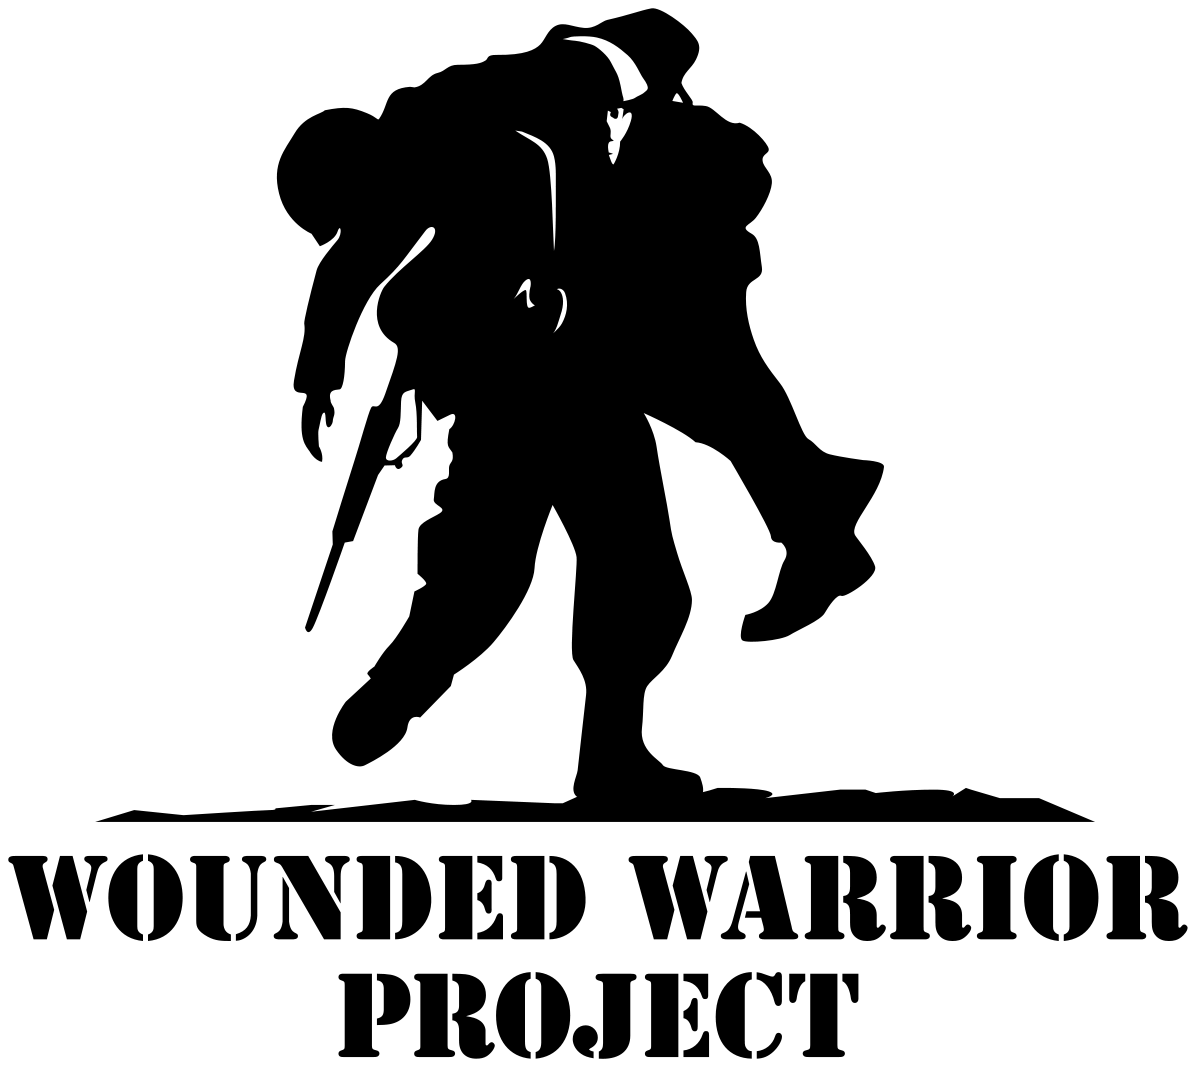 WOUNDED WARRIOR PROJECT.png